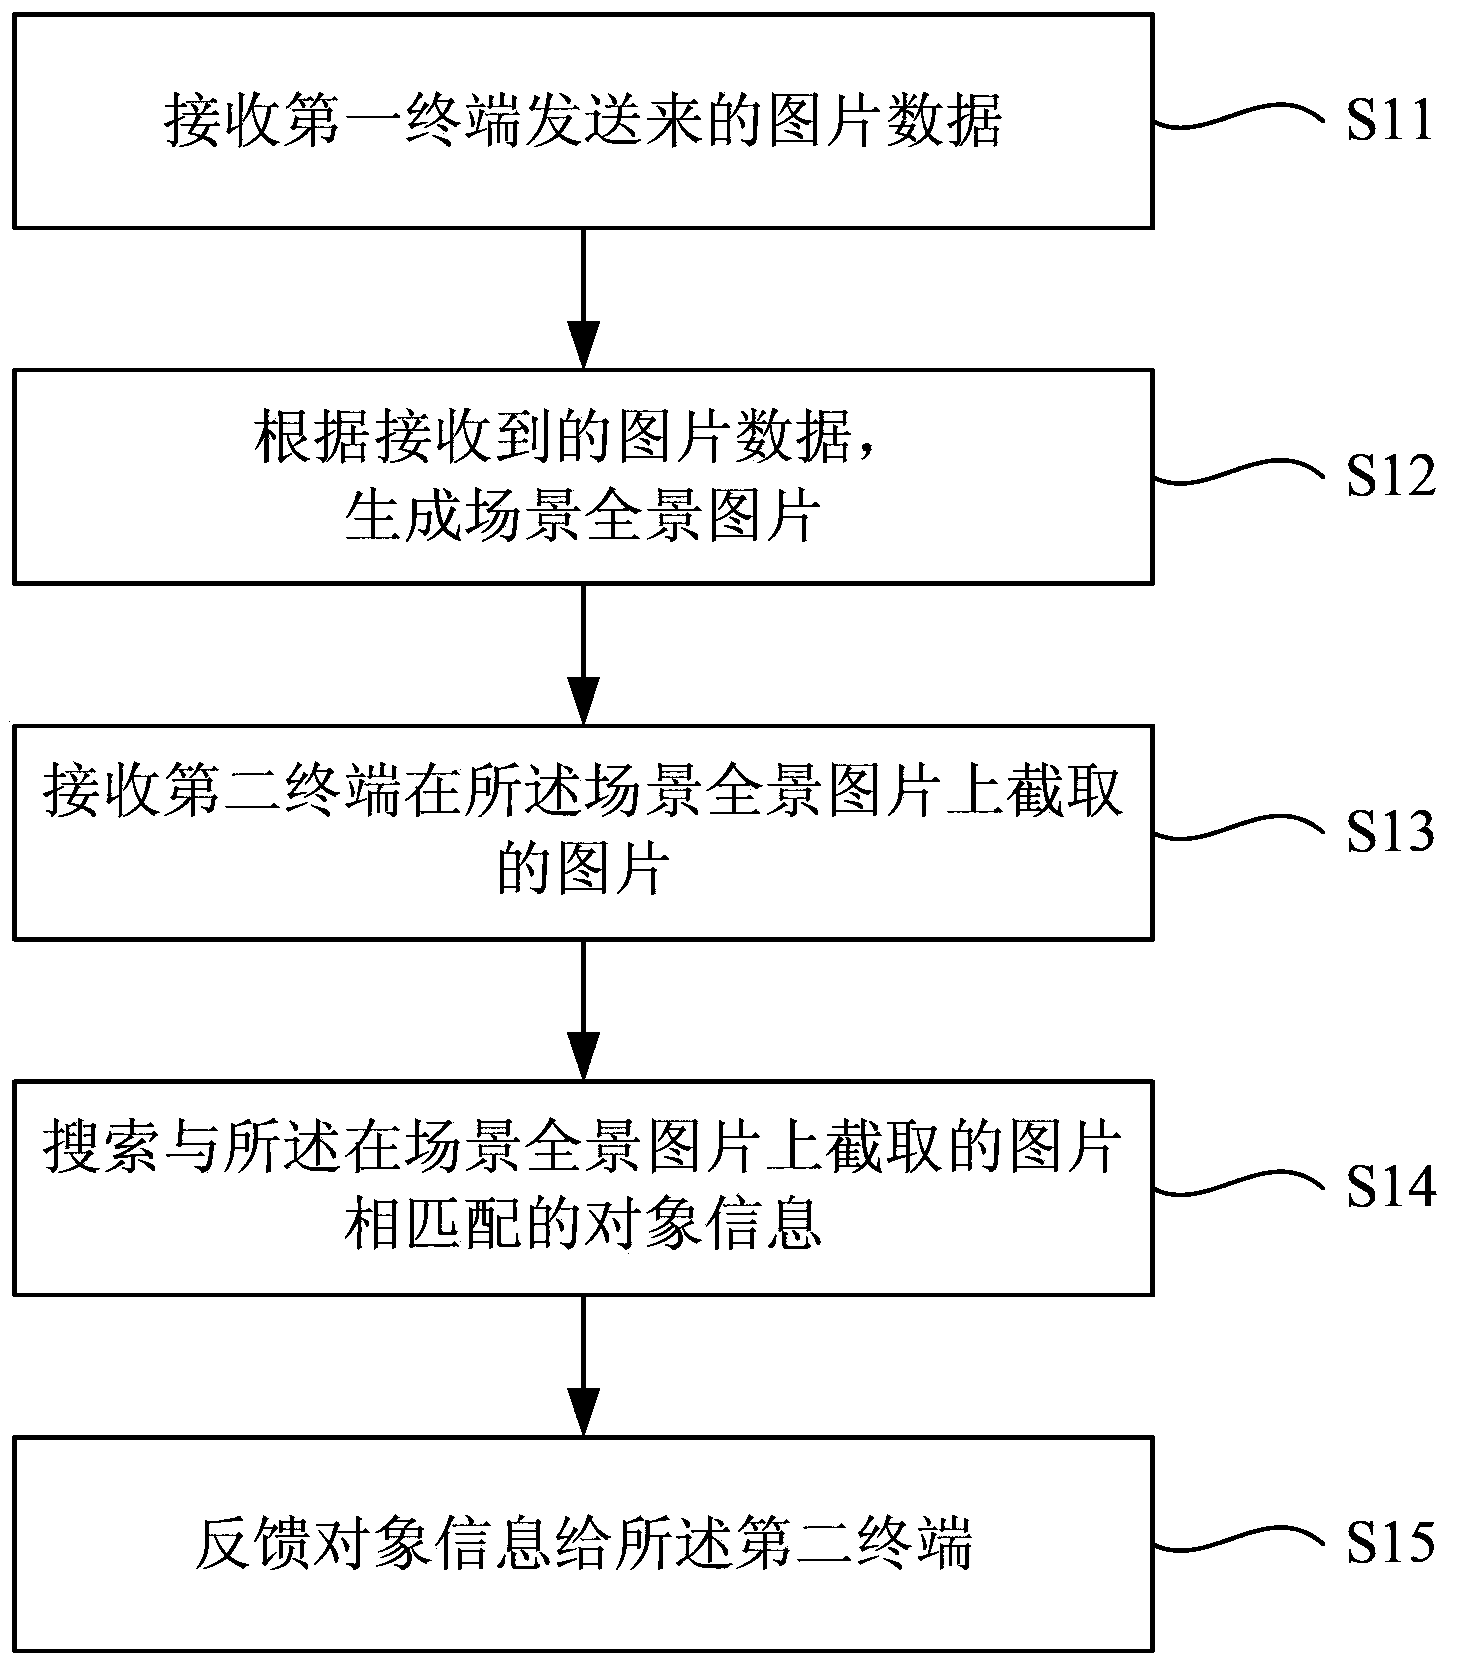 Object information display method, system and device